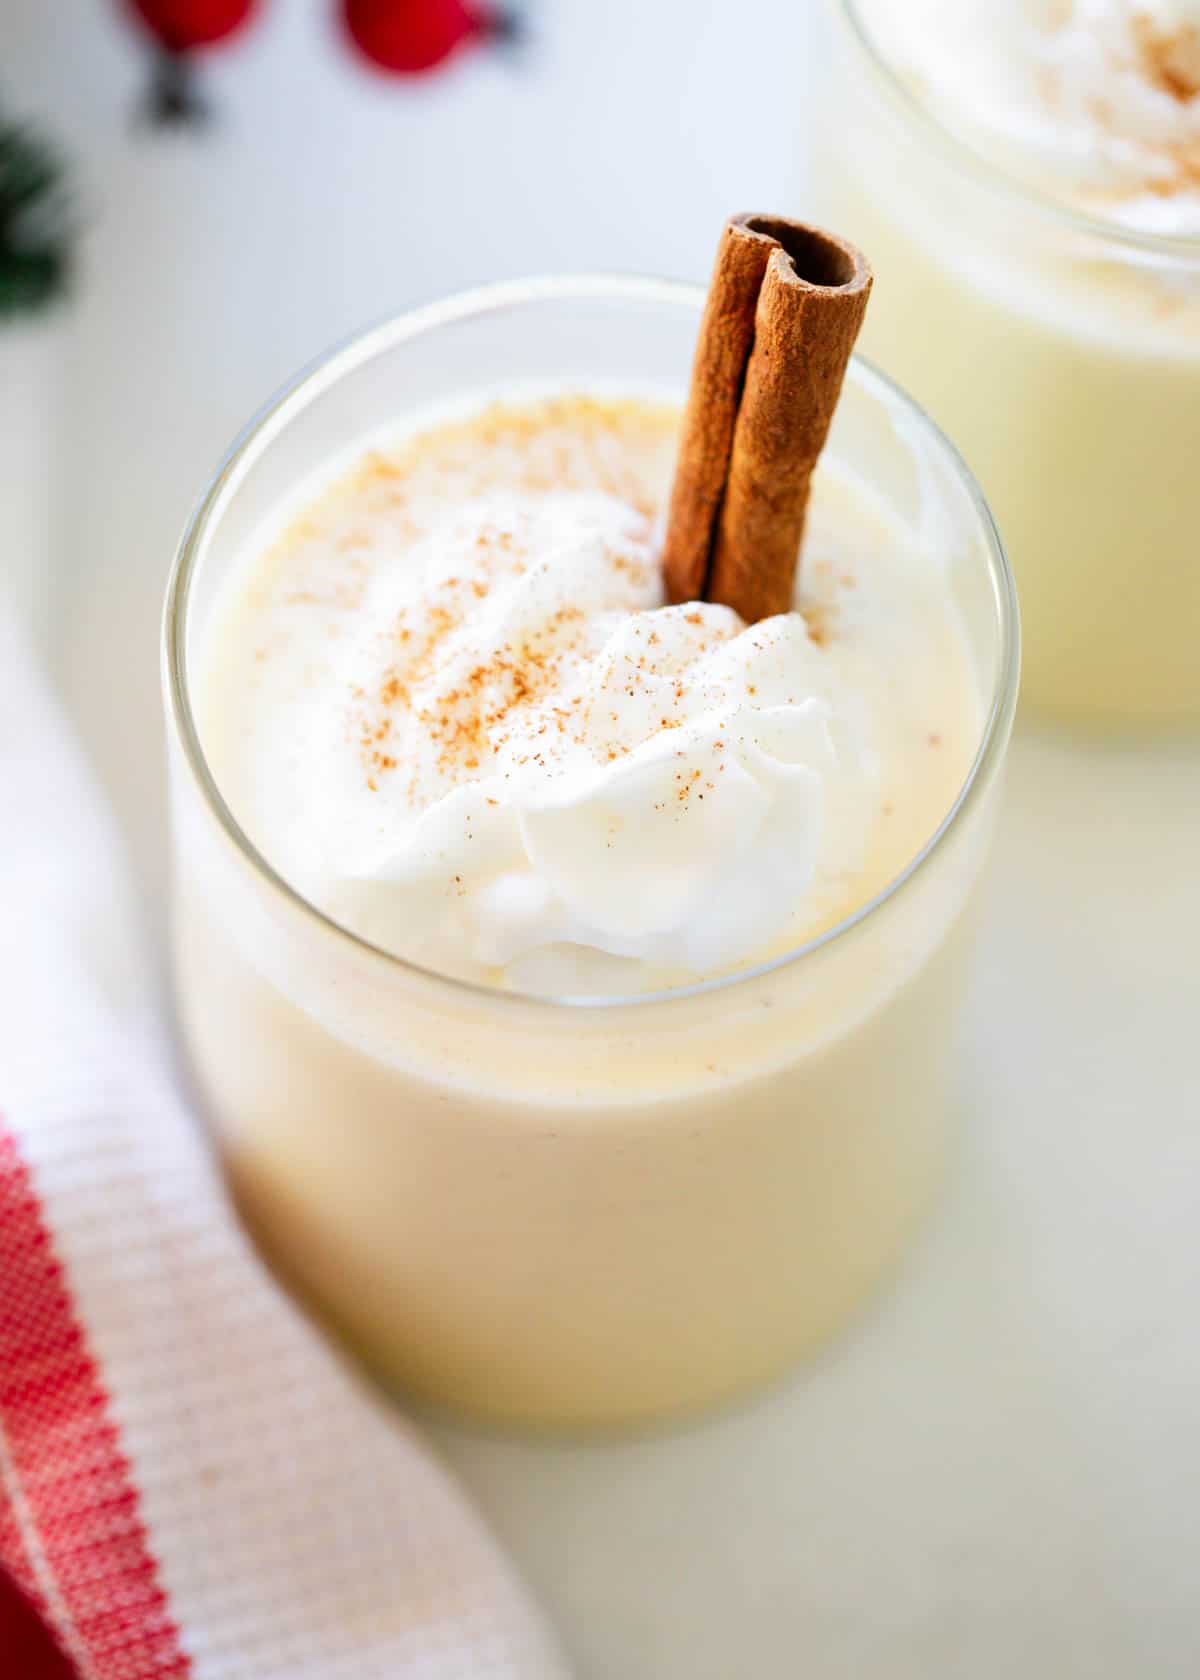 Eggnog in a cup with whipped cream.